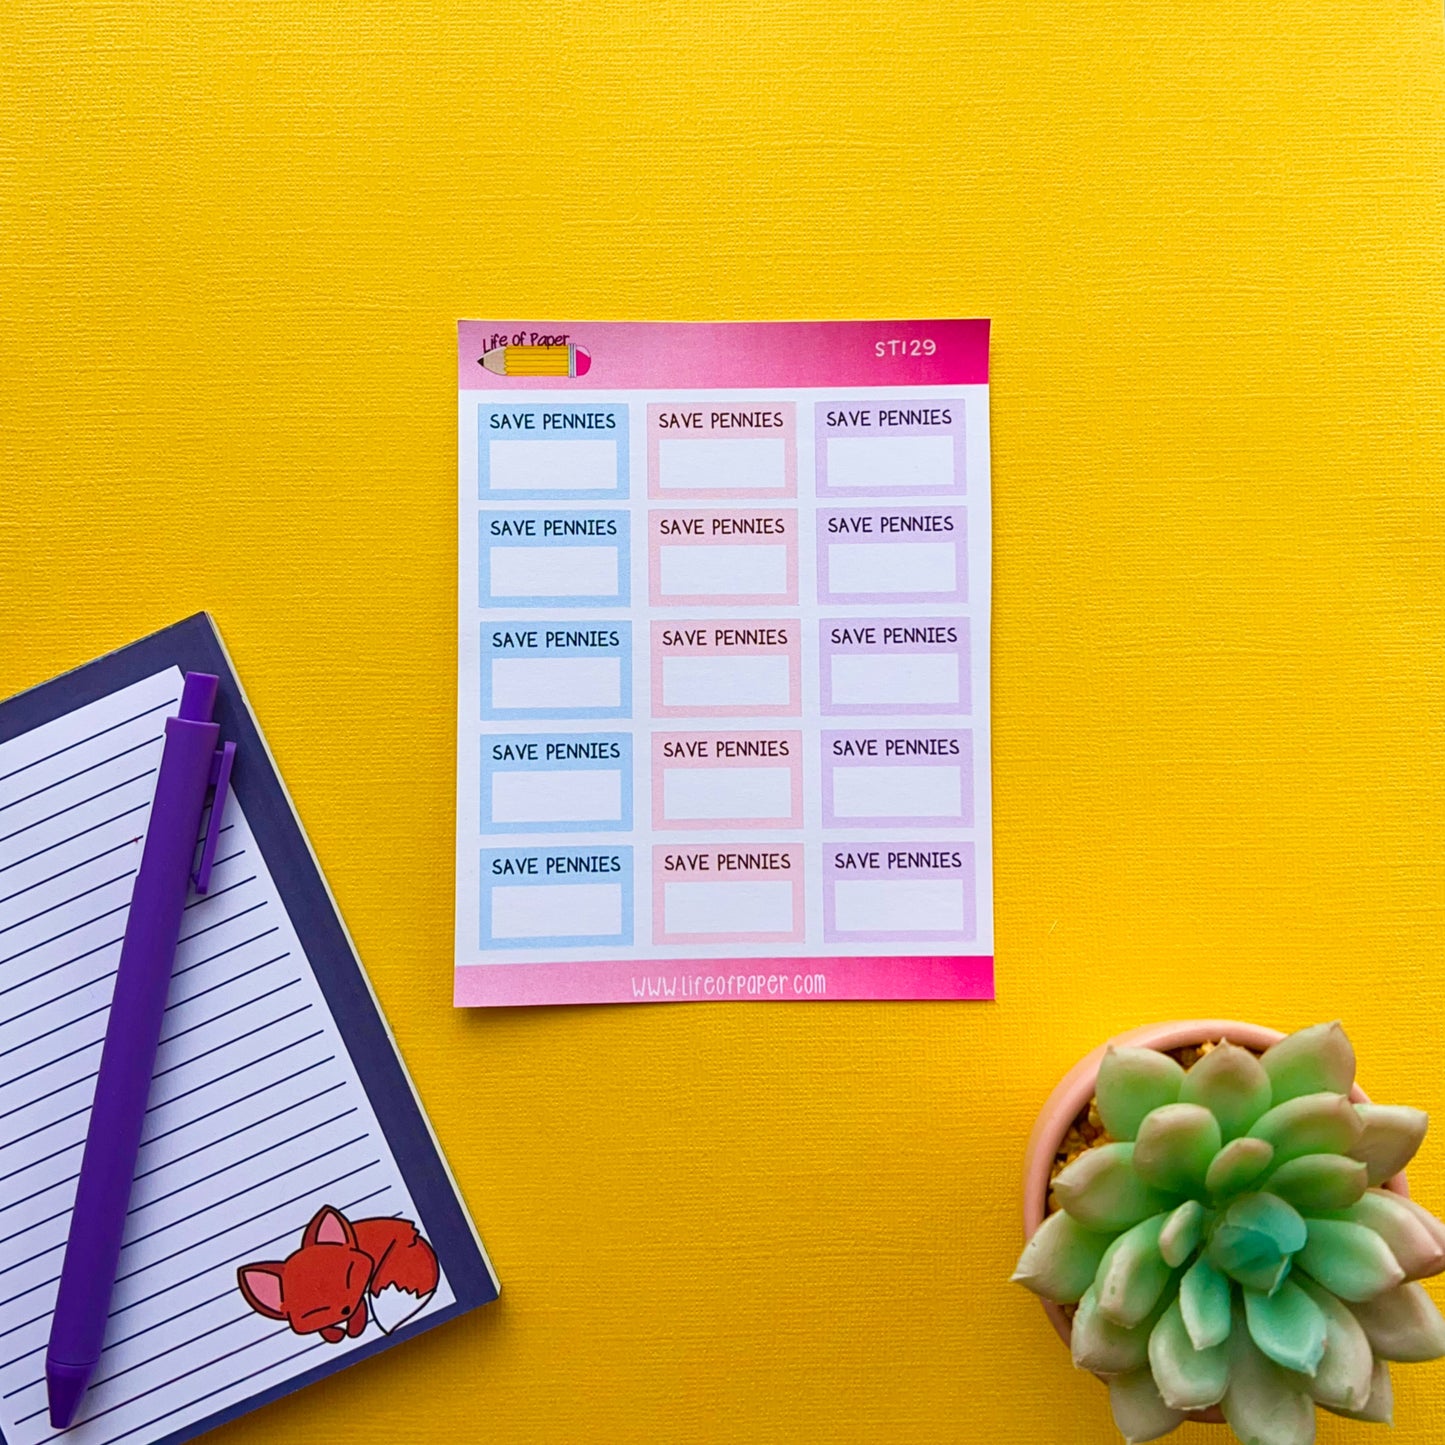 A sheet of colorful "Saving Amount Planner Stickers" is placed on a bright yellow surface. Next to it, there is a small lined notepad with a fox illustration in the corner and a purple pen resting on it. A succulent plant completes this cheerful setup, perfect for any Save Money Planner enthusiast.